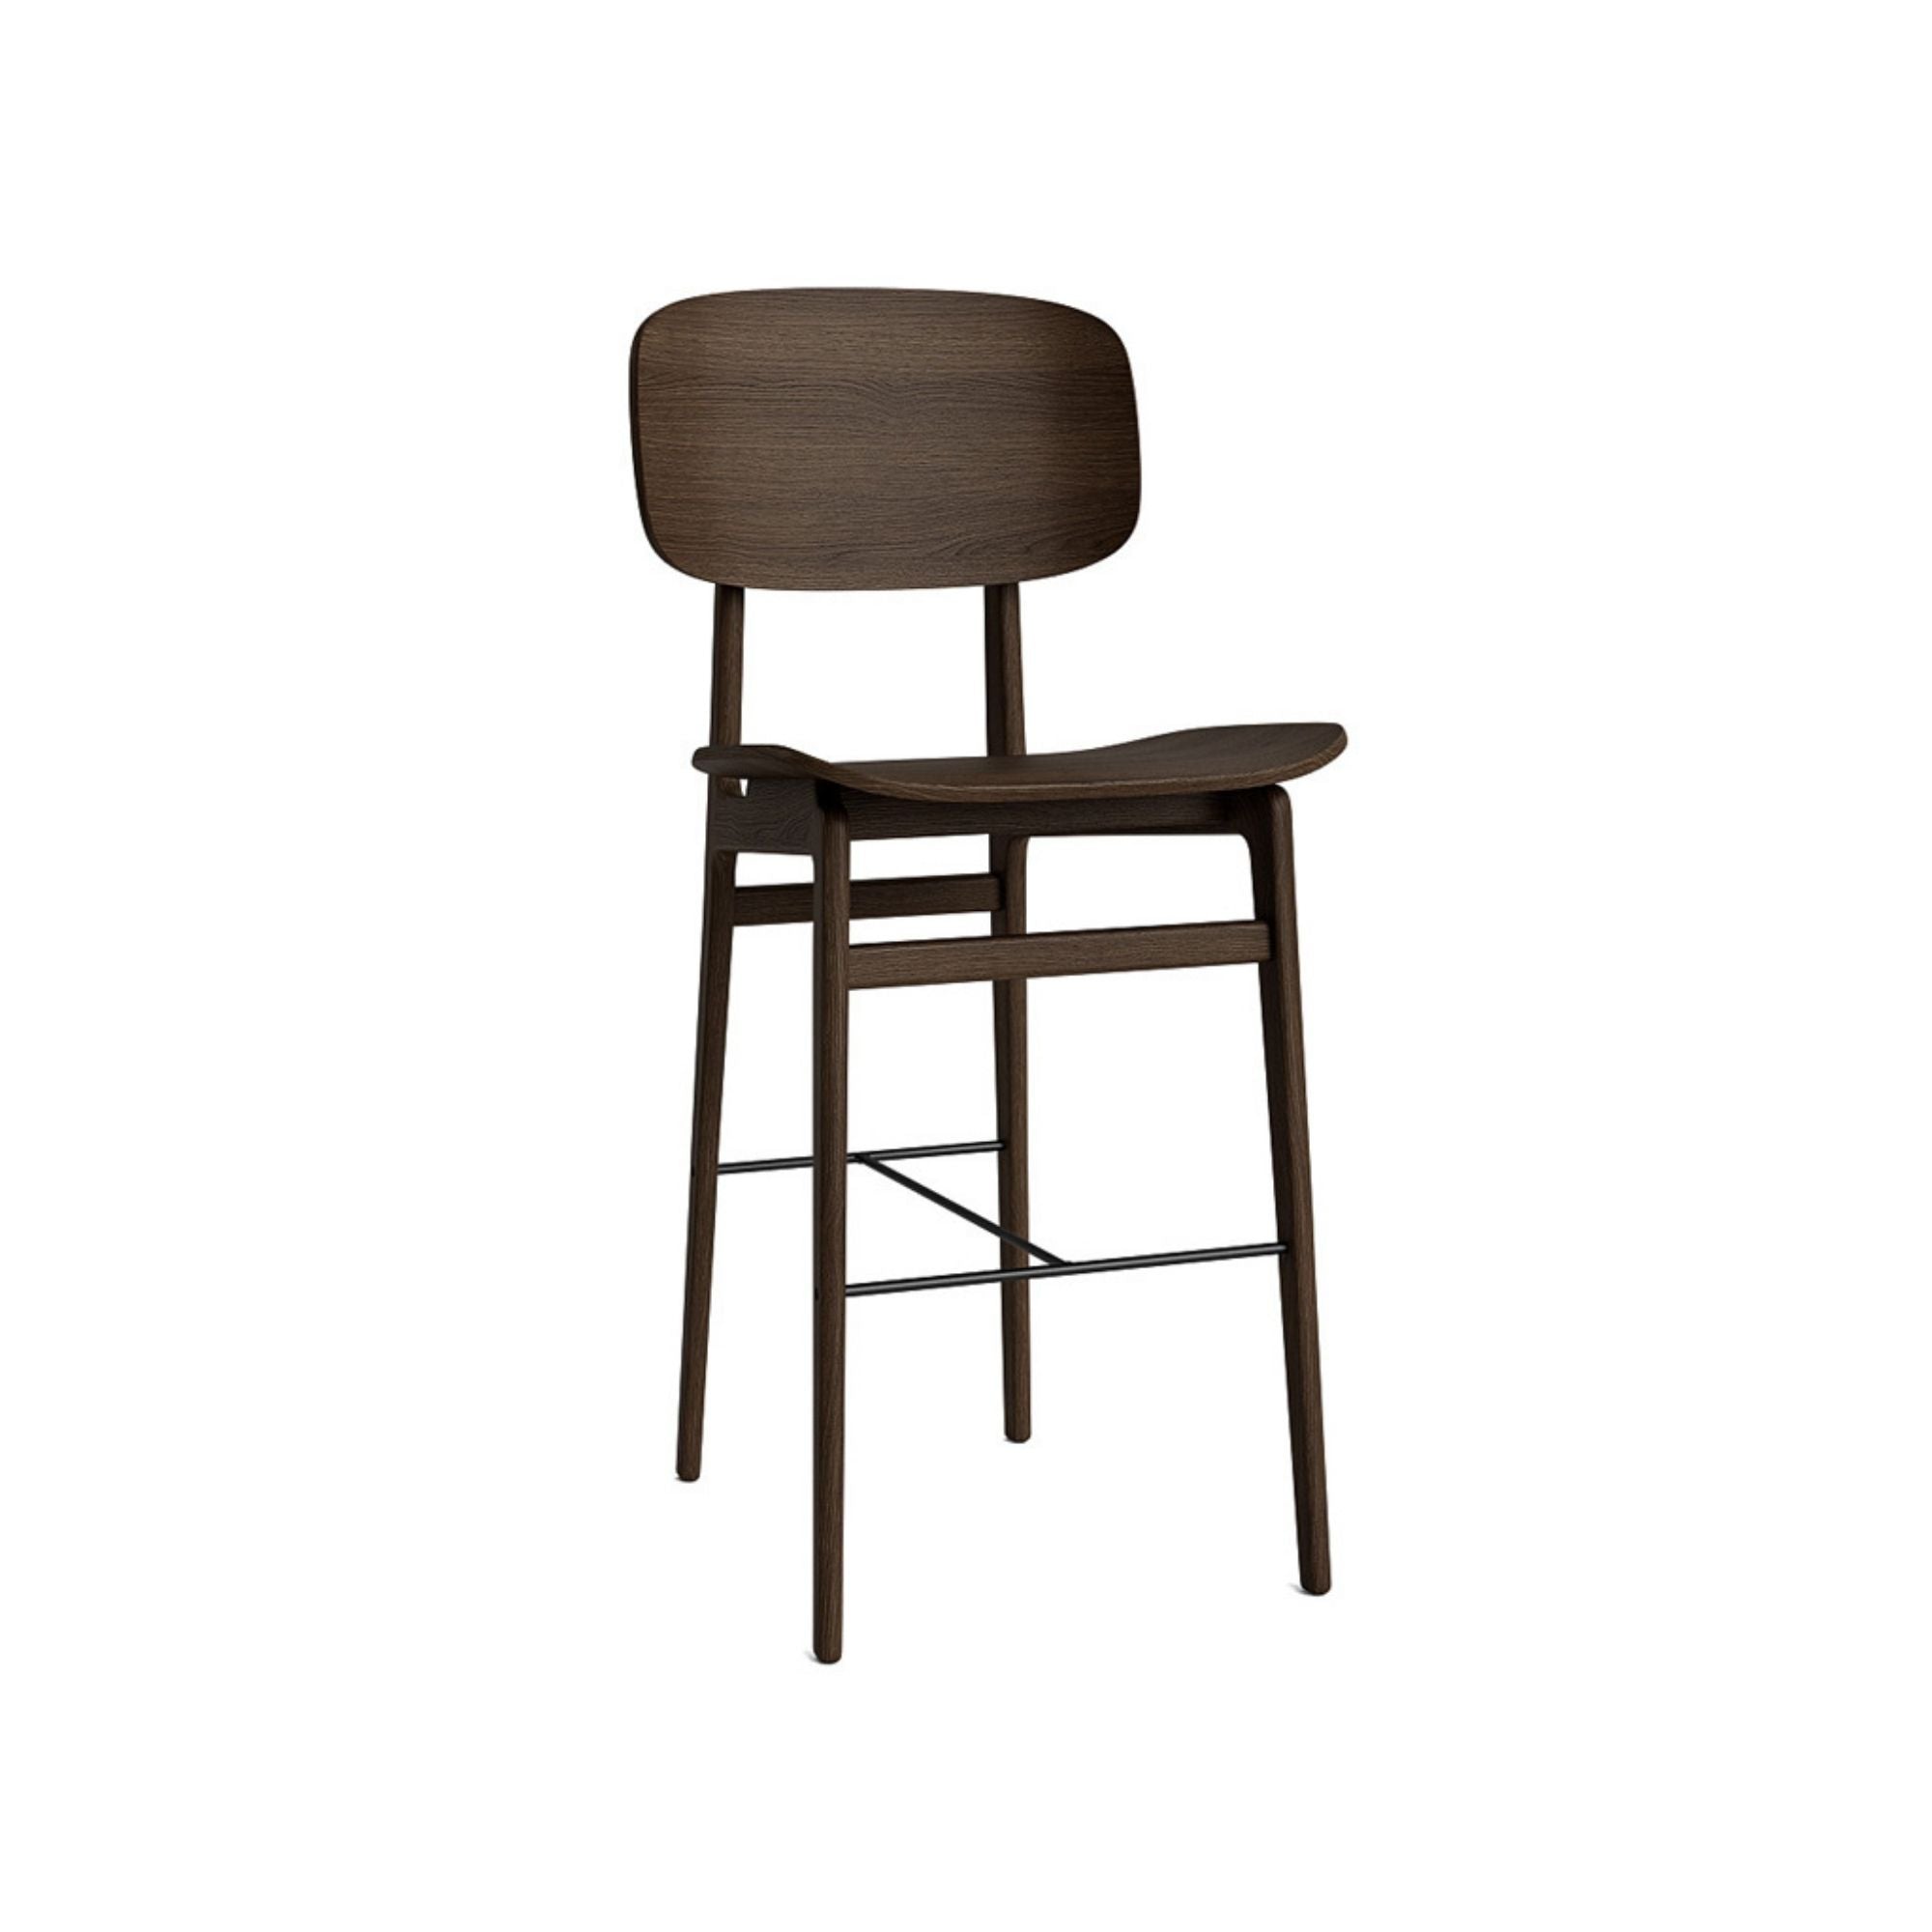 NY11 Bar Chair - THAT COOL LIVING